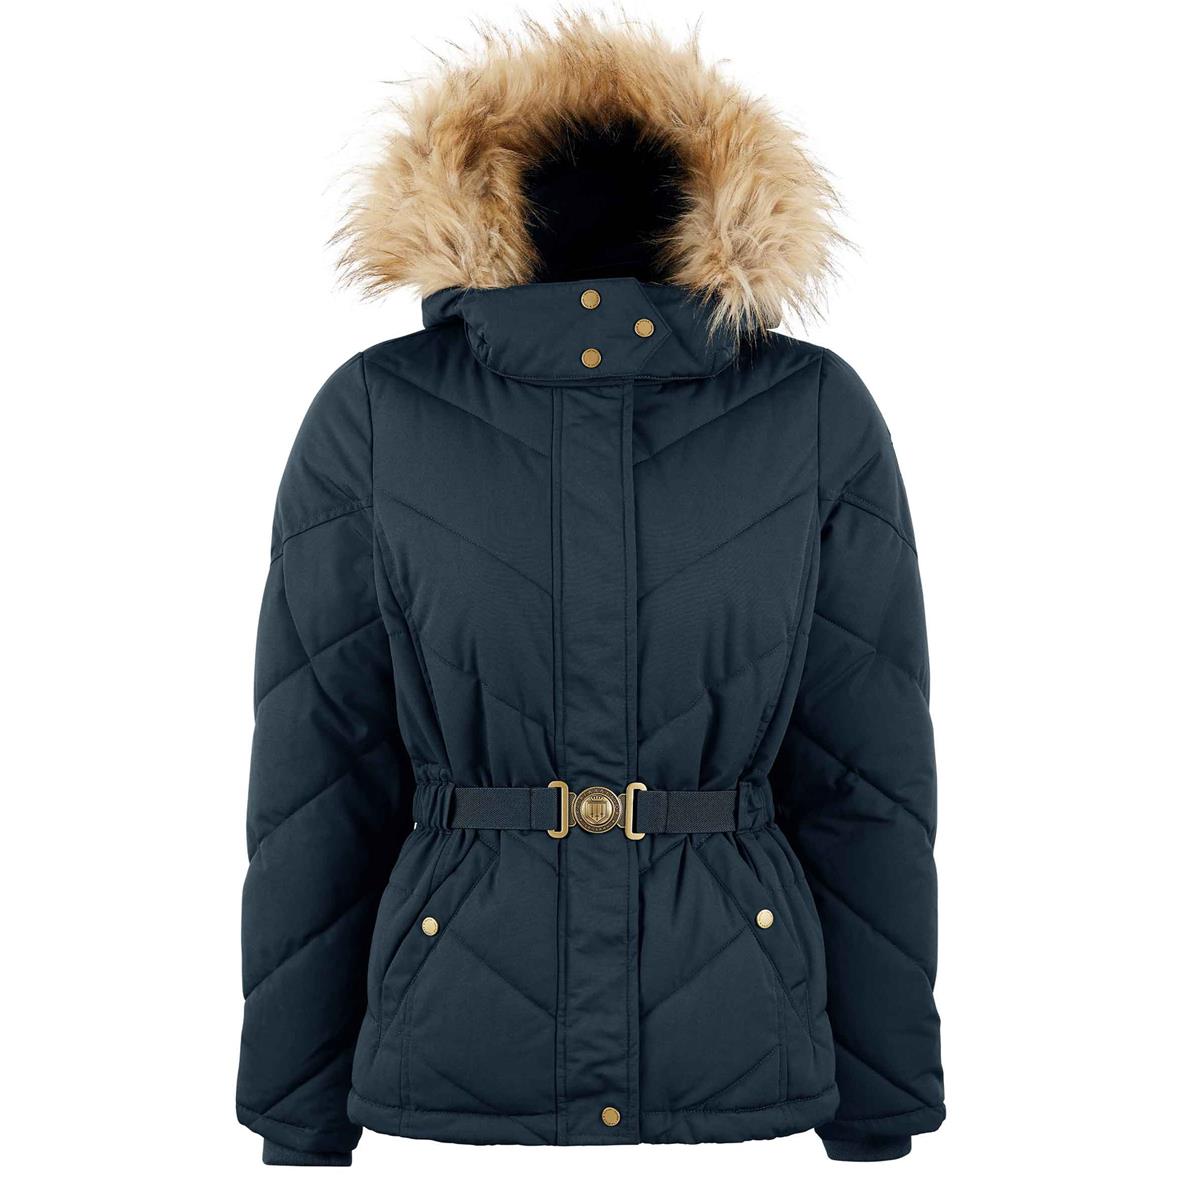 Does the Fairfax & Favor Women's Charlotte Padded Jacket have zipped or open pockets?